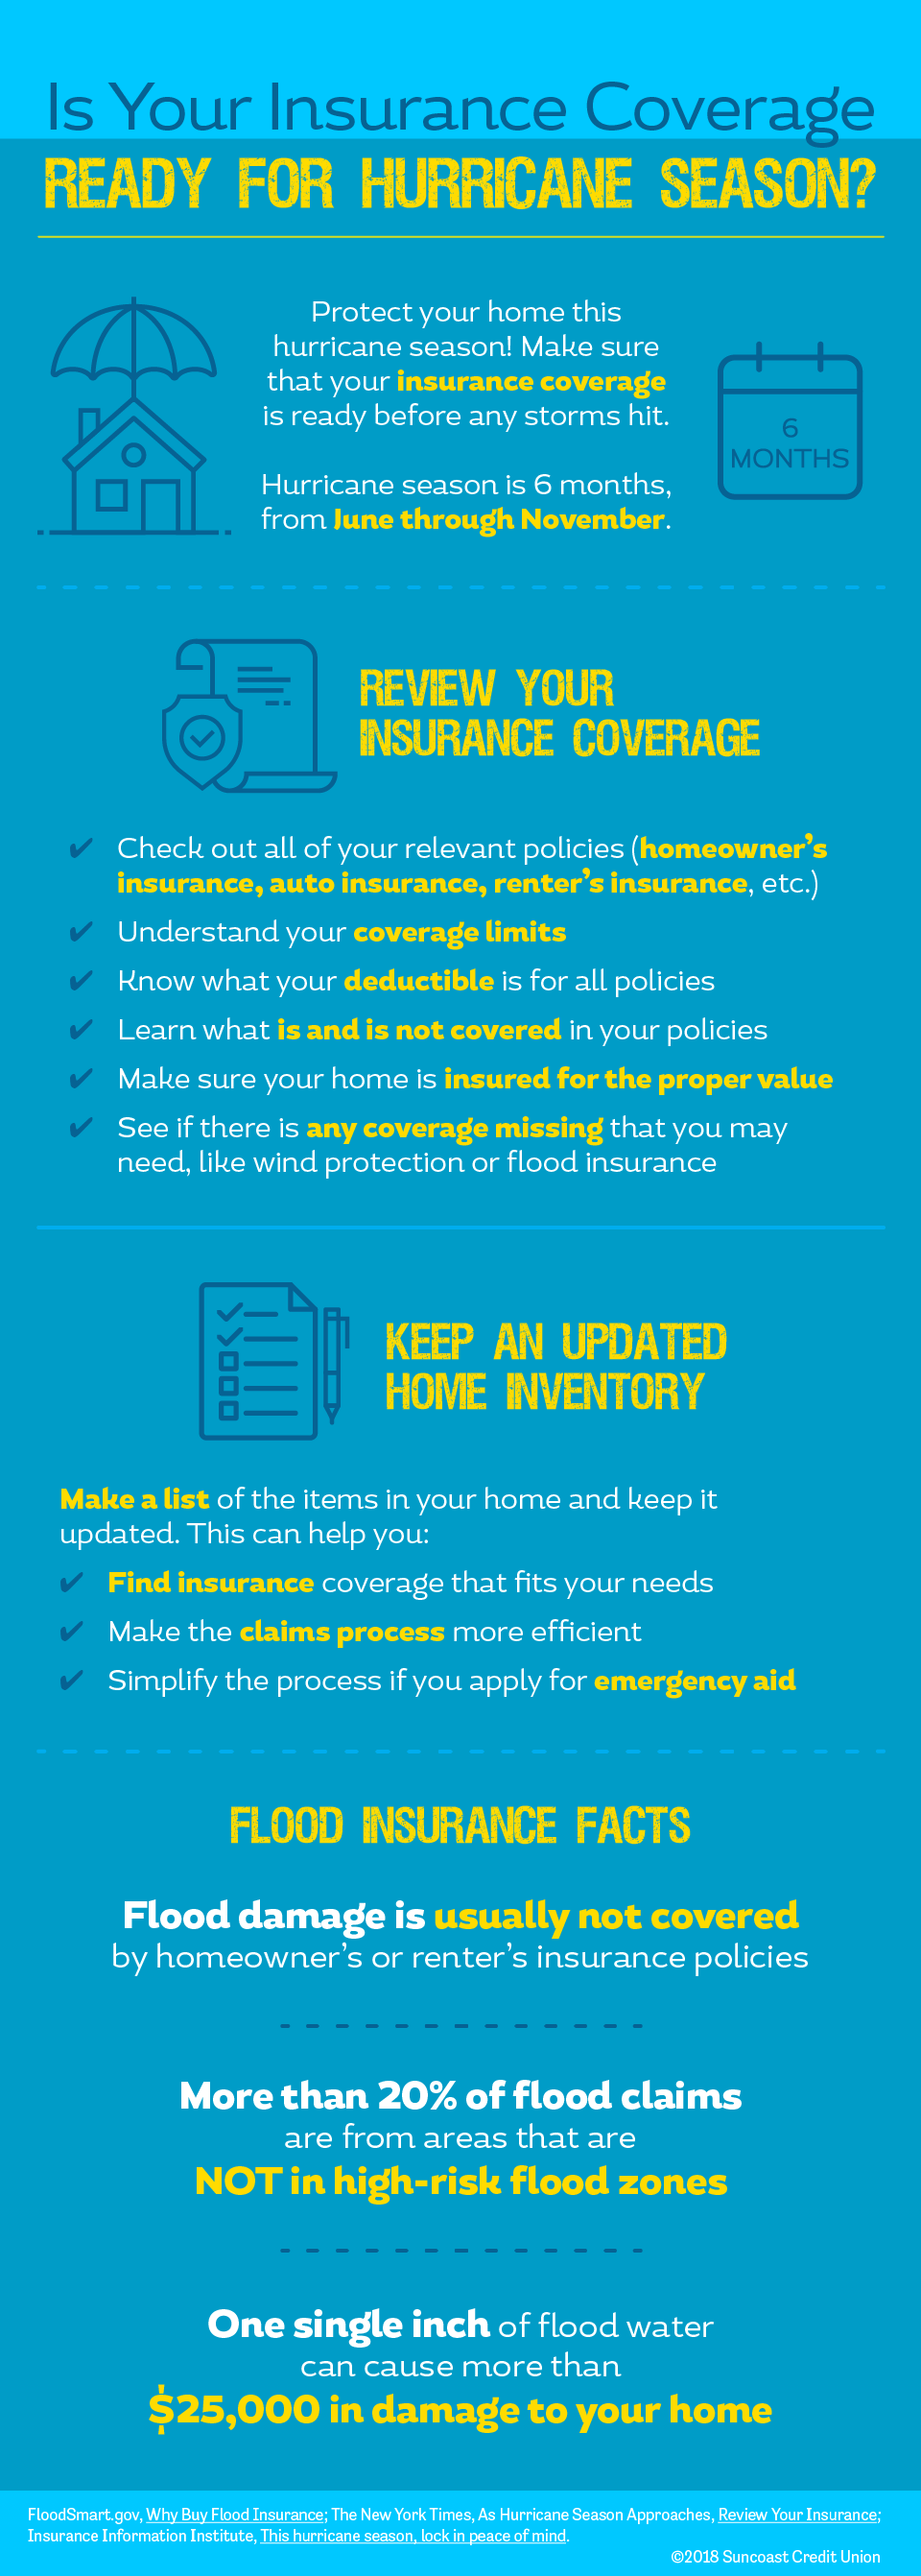 Is your home insurance ready for hurricane season – Infographic